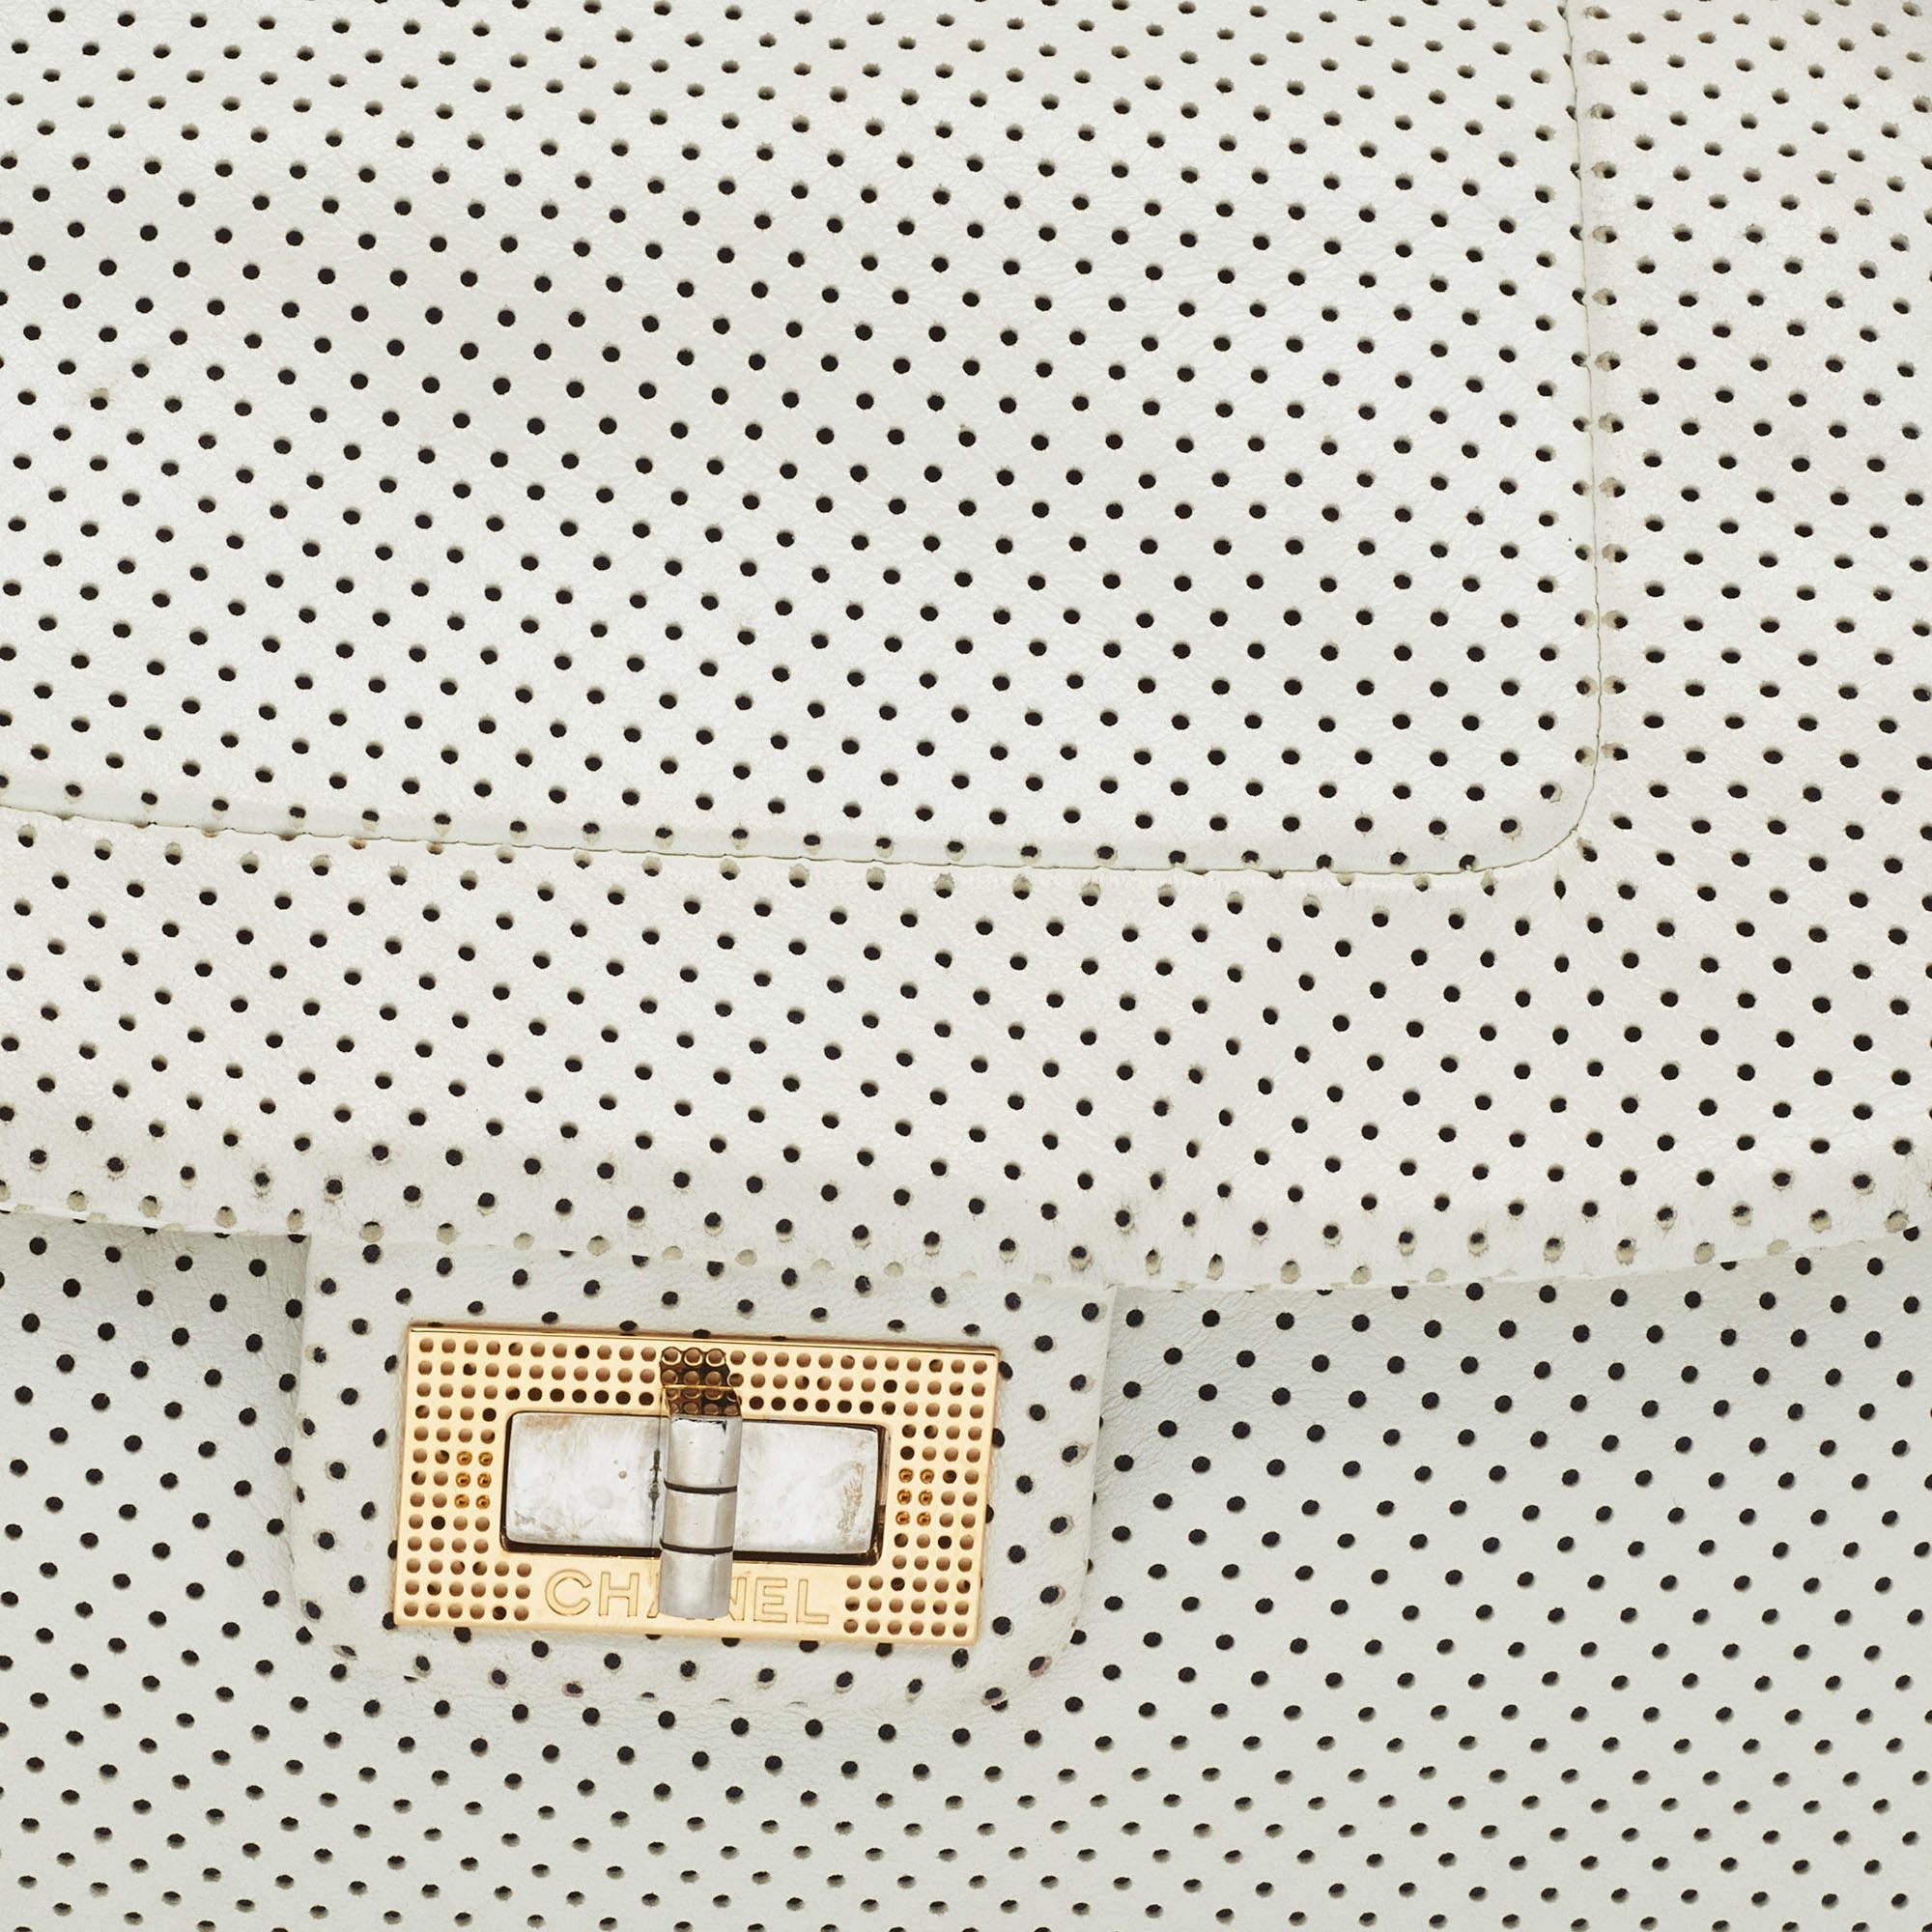 Chanel White Perforated Leather Accordion Flap Bag 5